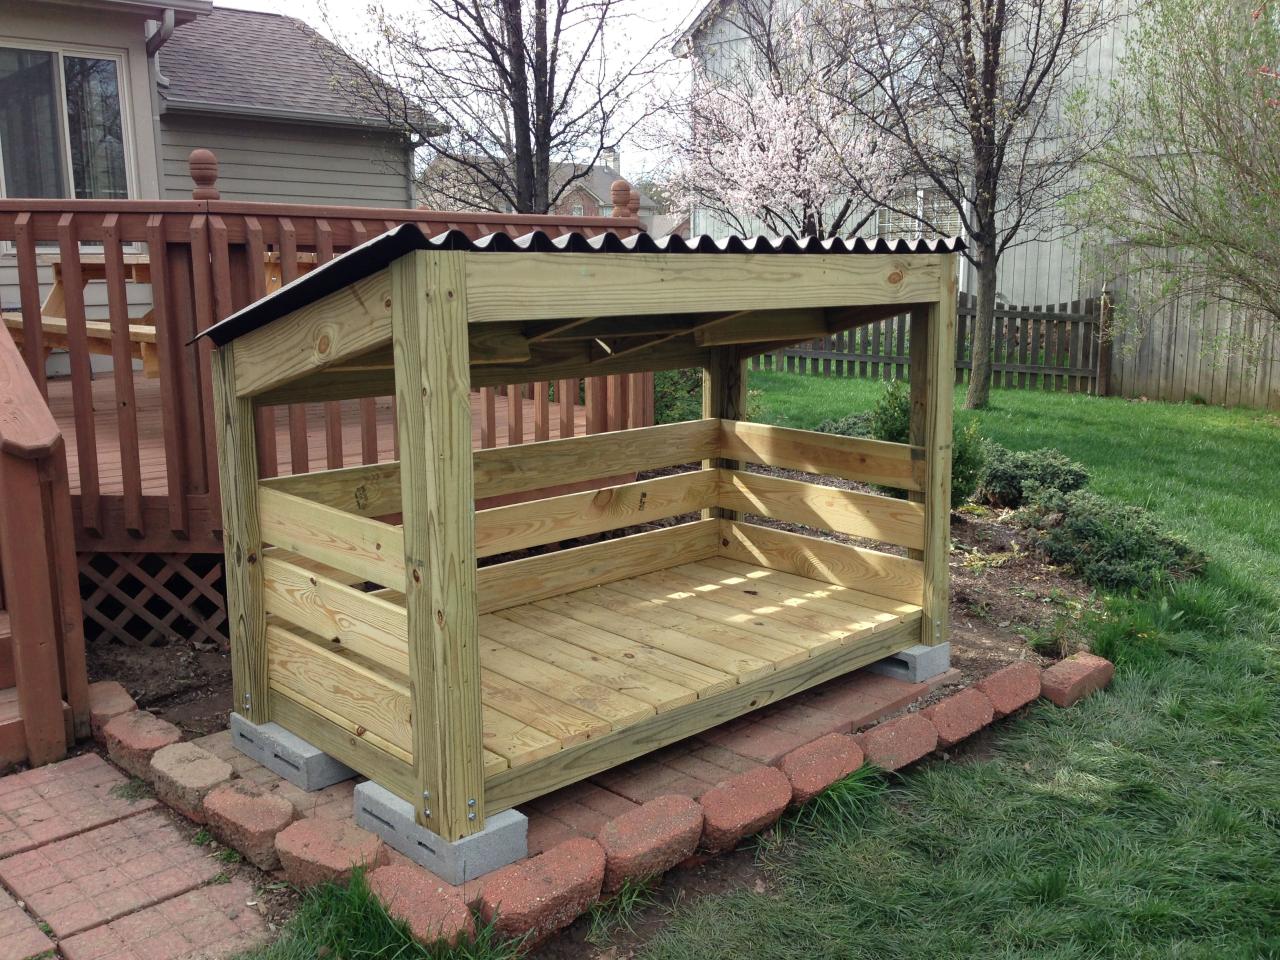 Woodshed To Store All The Wood For Our Fireplace And Fire Pit. | Firewood  Shed, Firewood Storage, Outdoor Firewood Rack